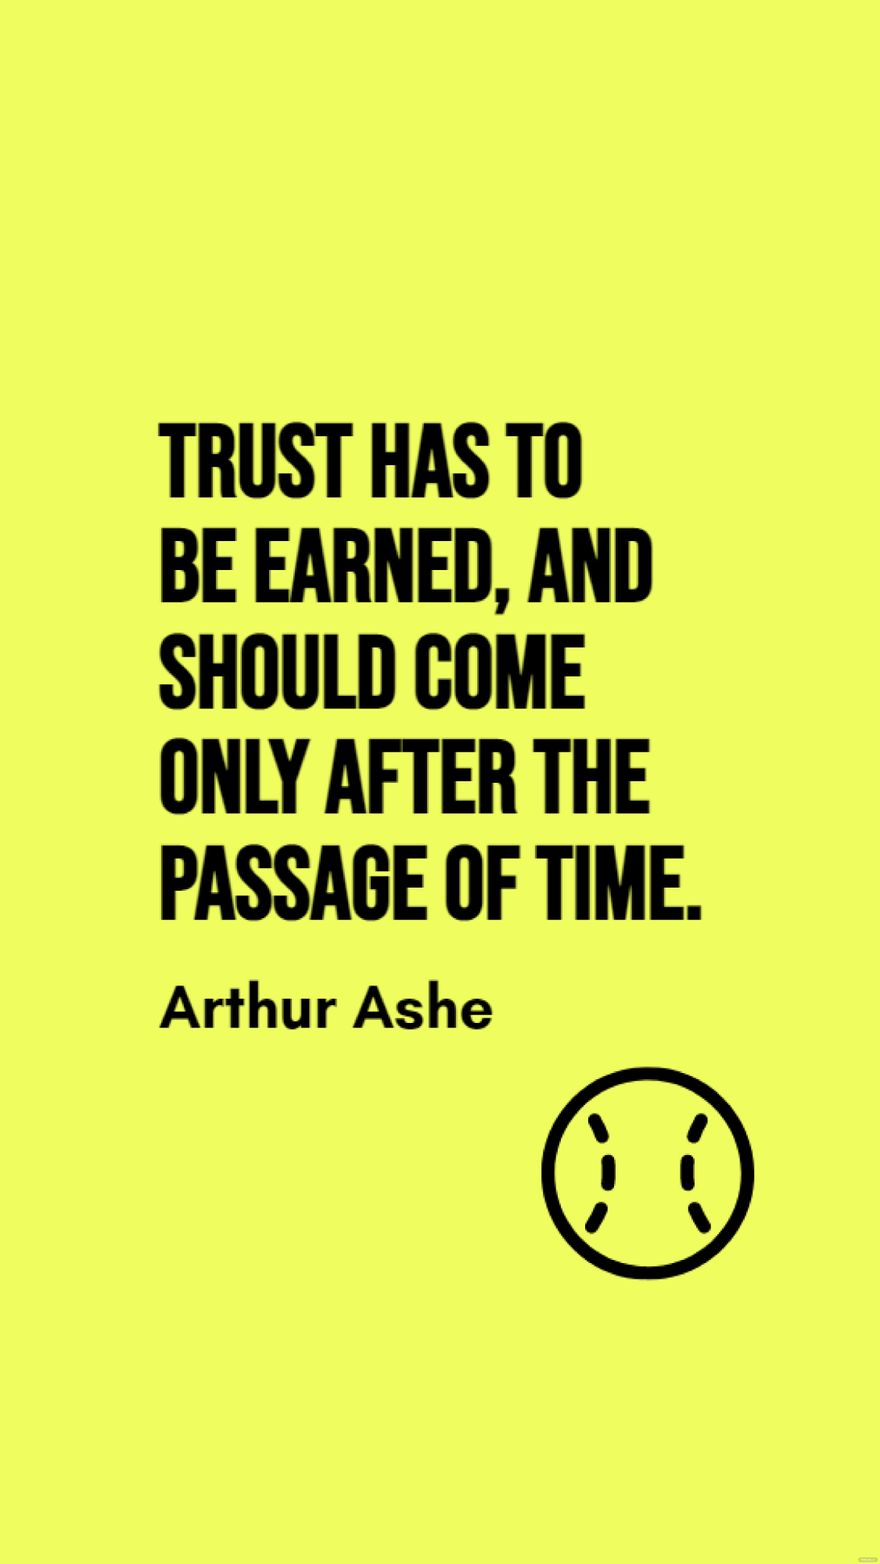 Free Arthur Ashe - Trust has to be earned, and should come only after the passage of time. in JPG